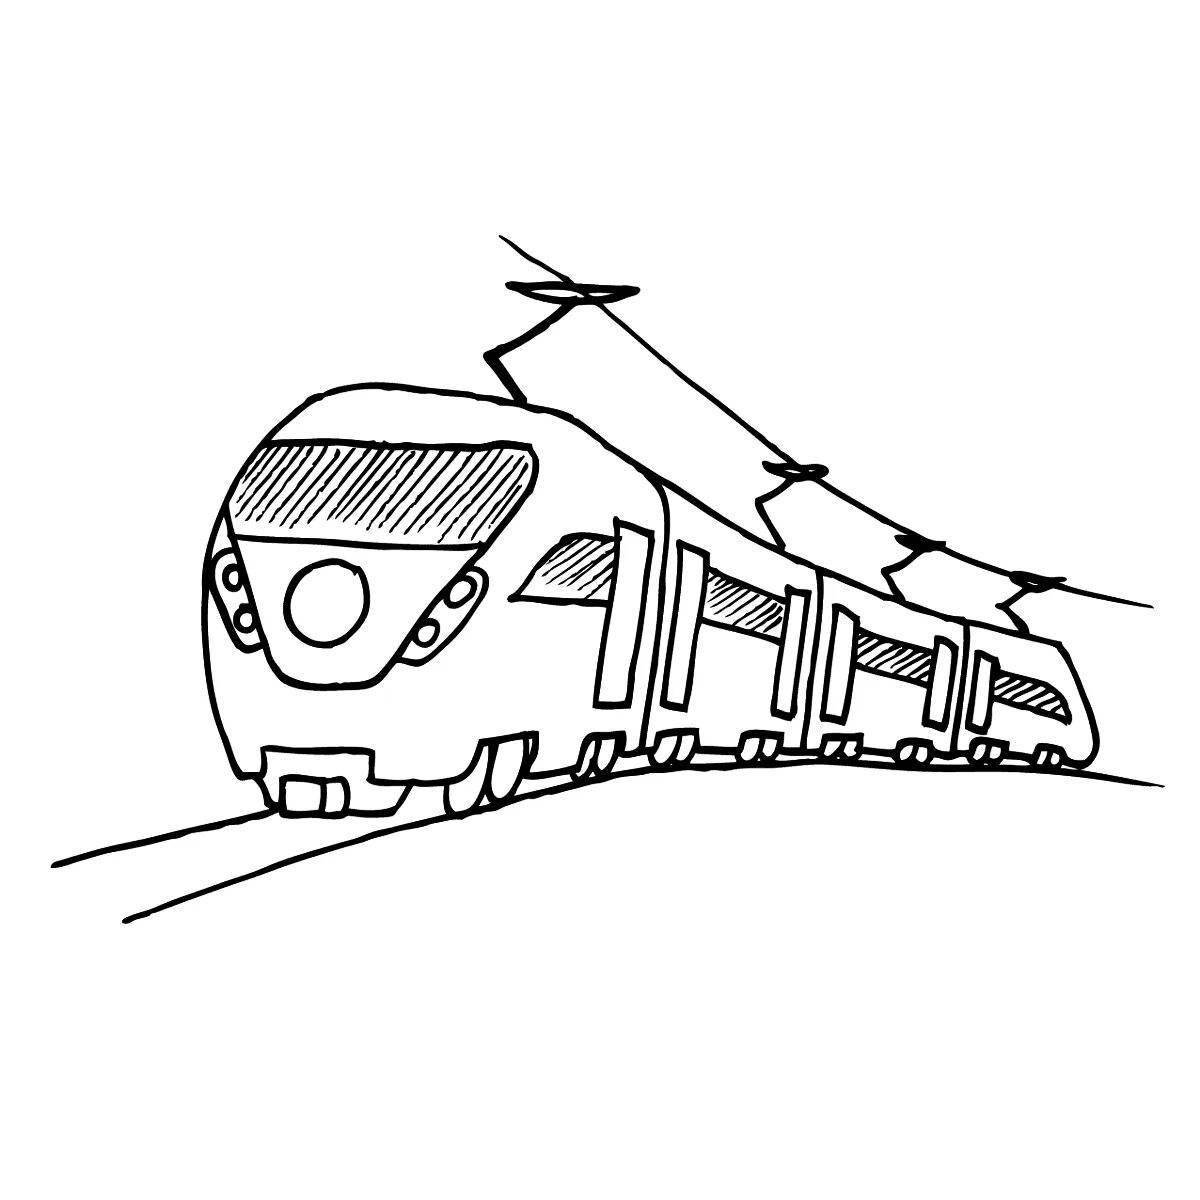 Coloring page magical train with swallows